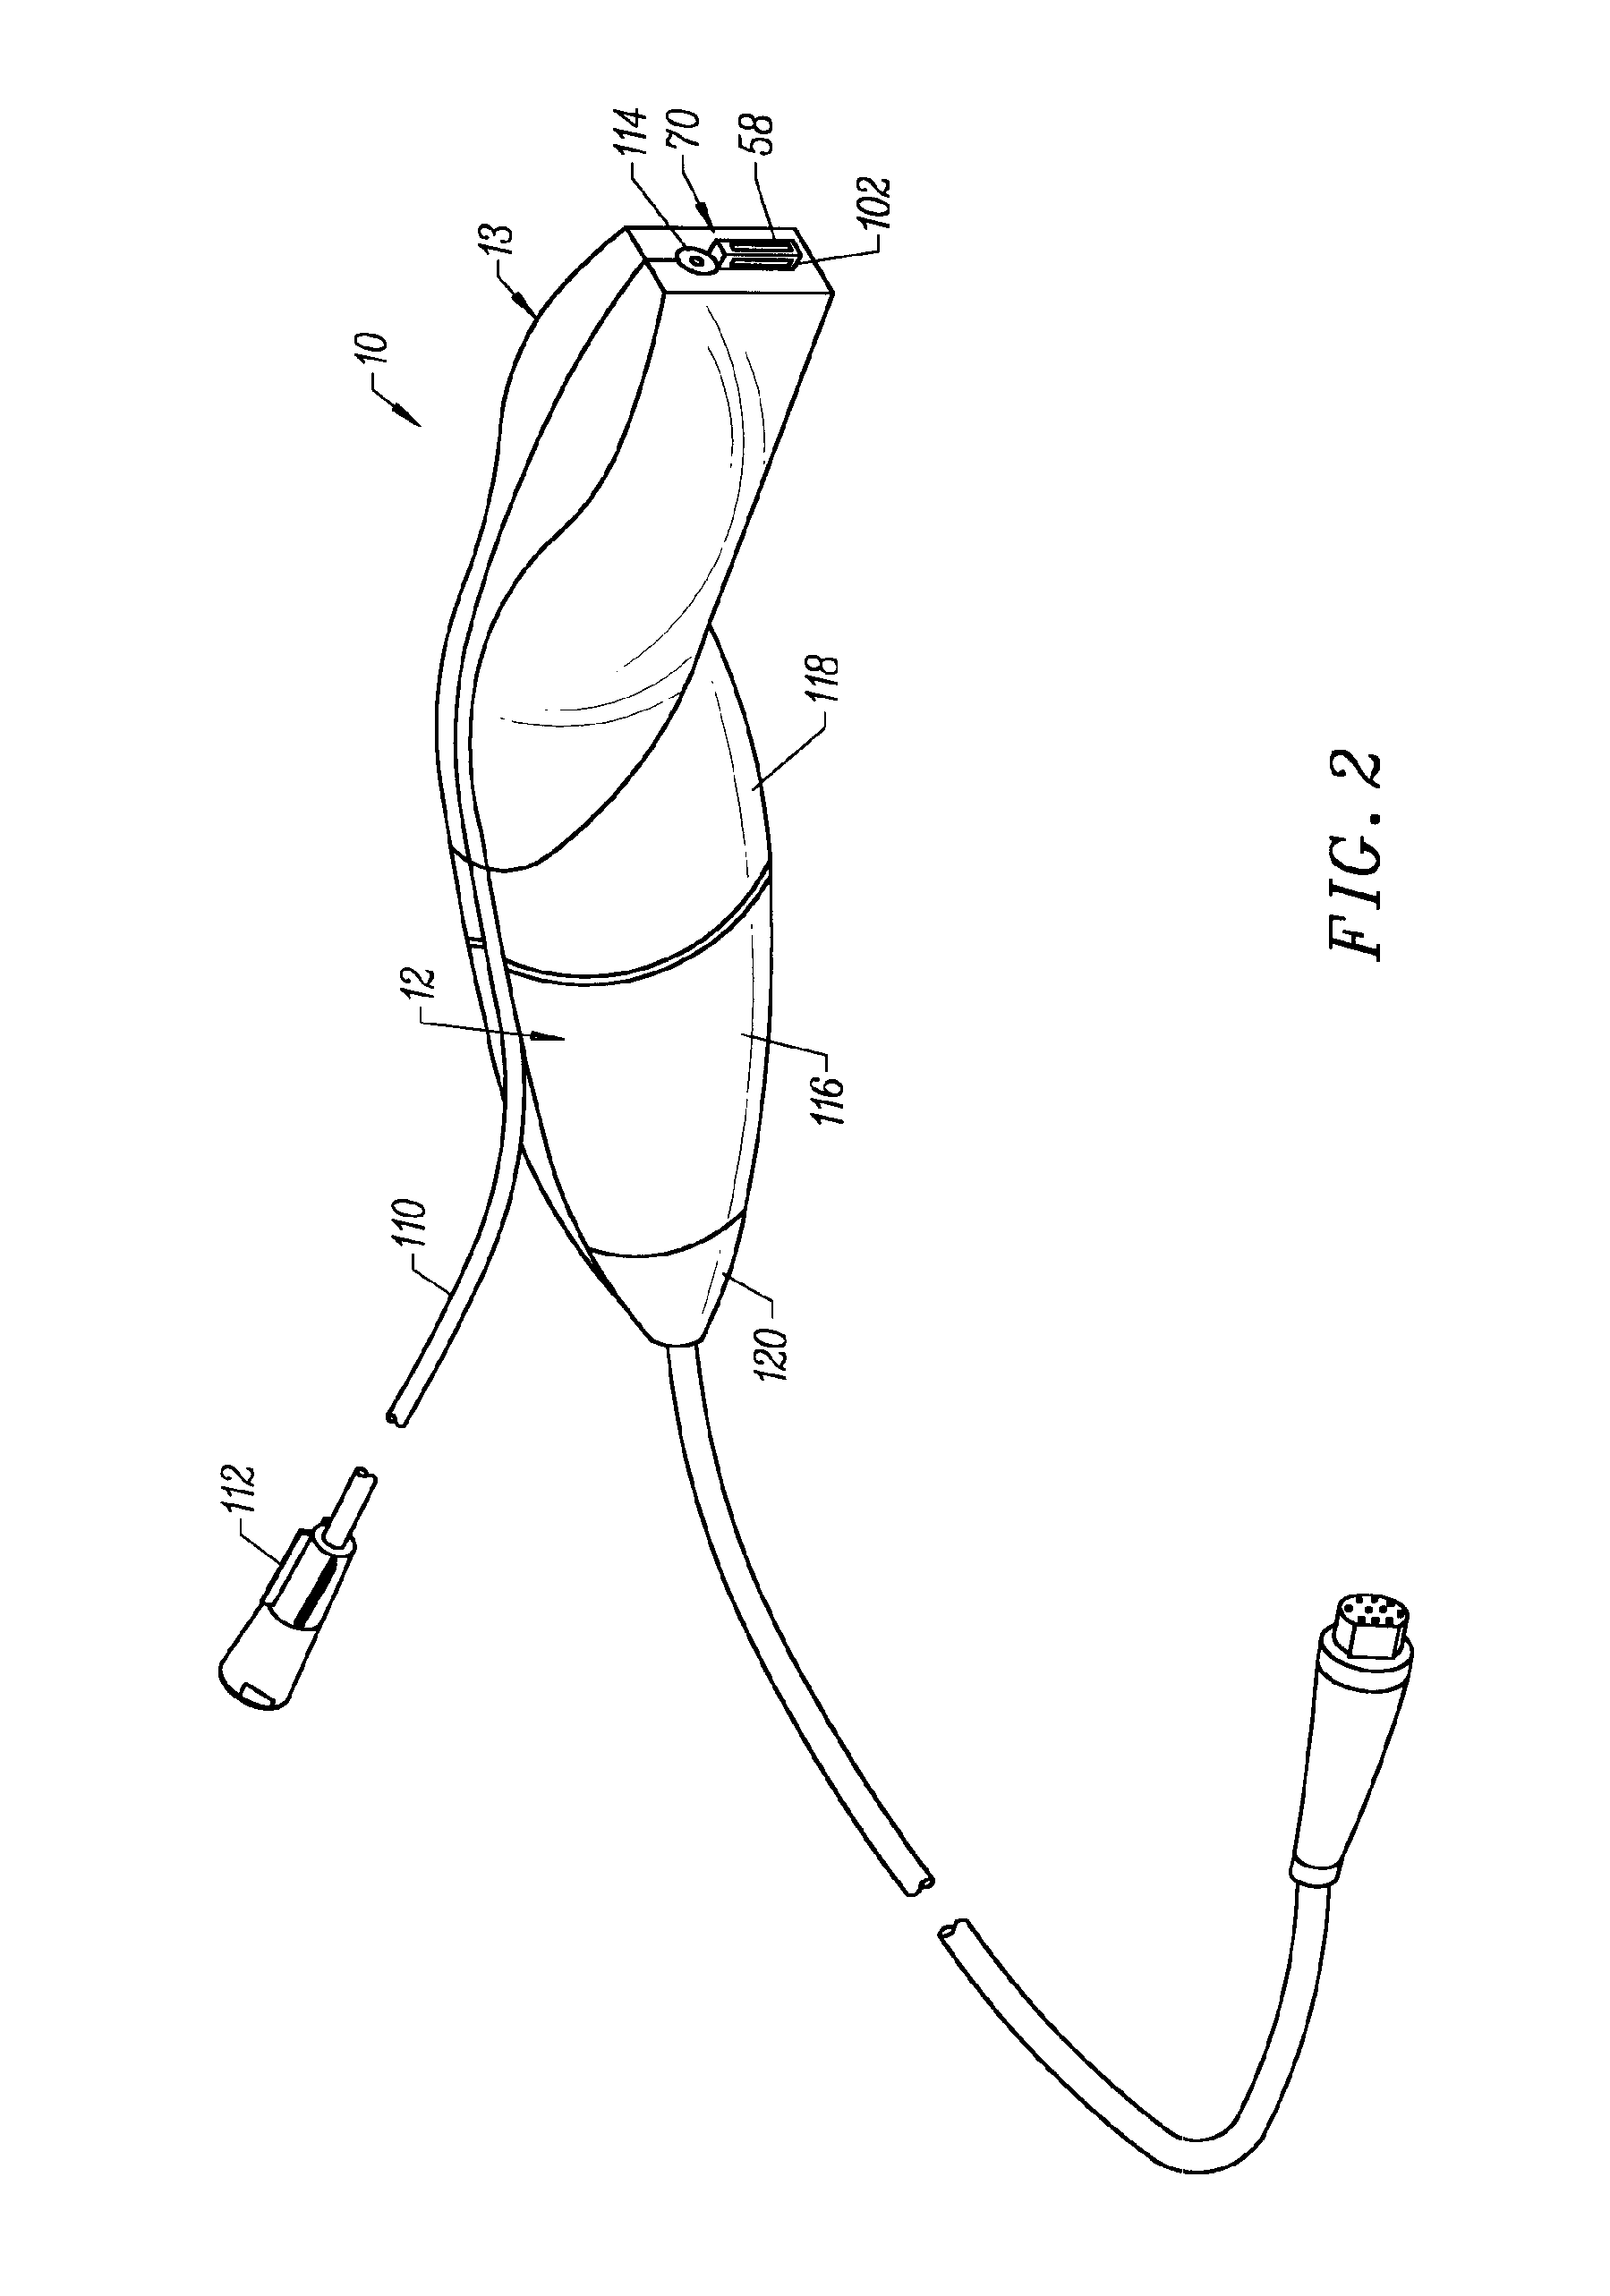 Systems and methods for electrosurgical removal of the stratum corneum